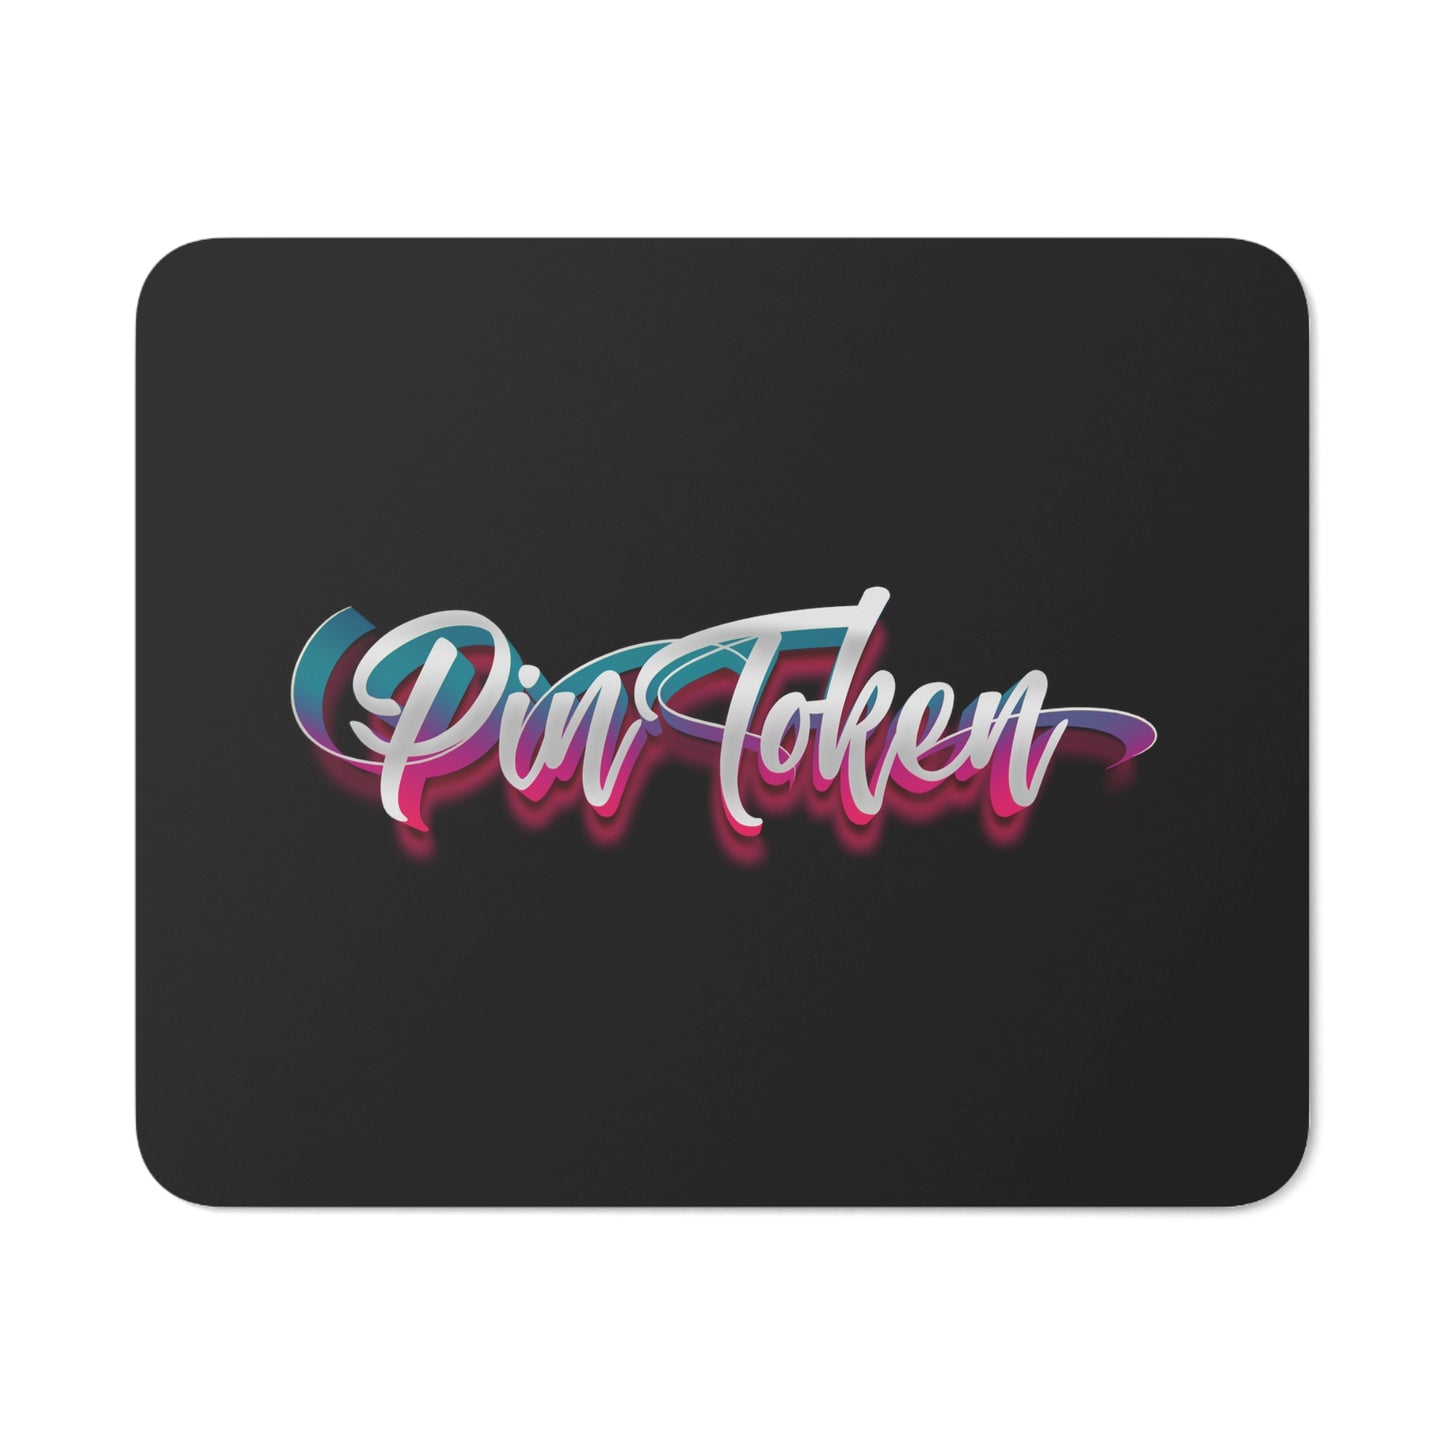 Desk Mouse Pad (PIN Spray Paint)